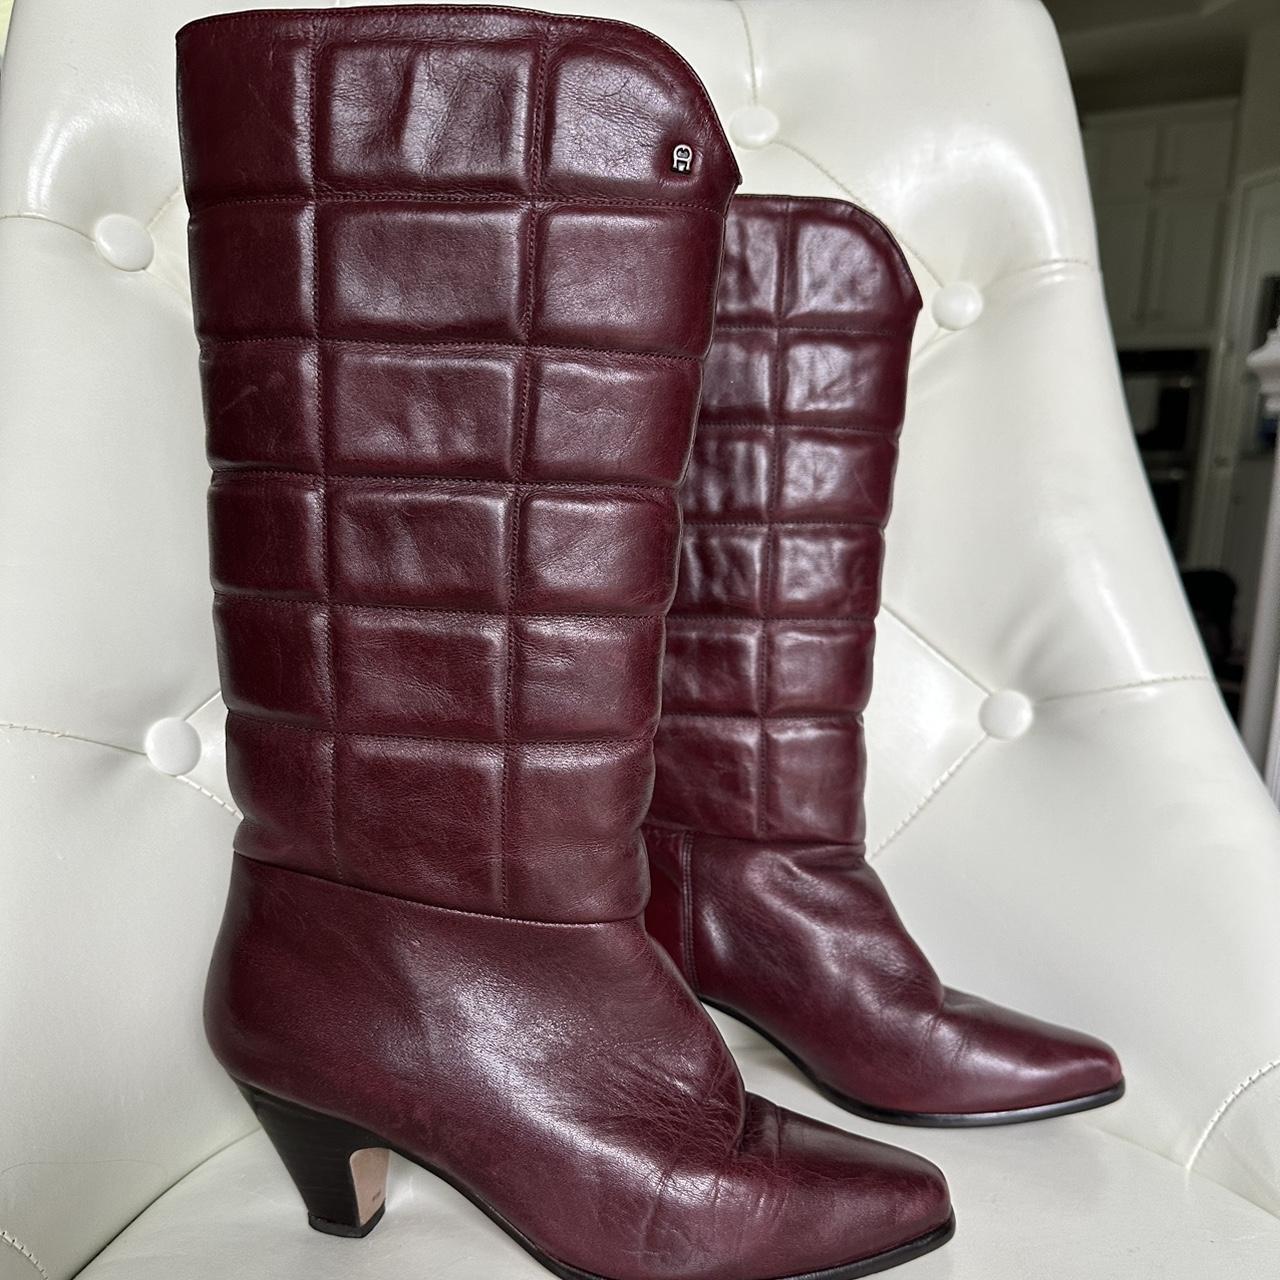 Aigner Women's Burgundy and Red Boots